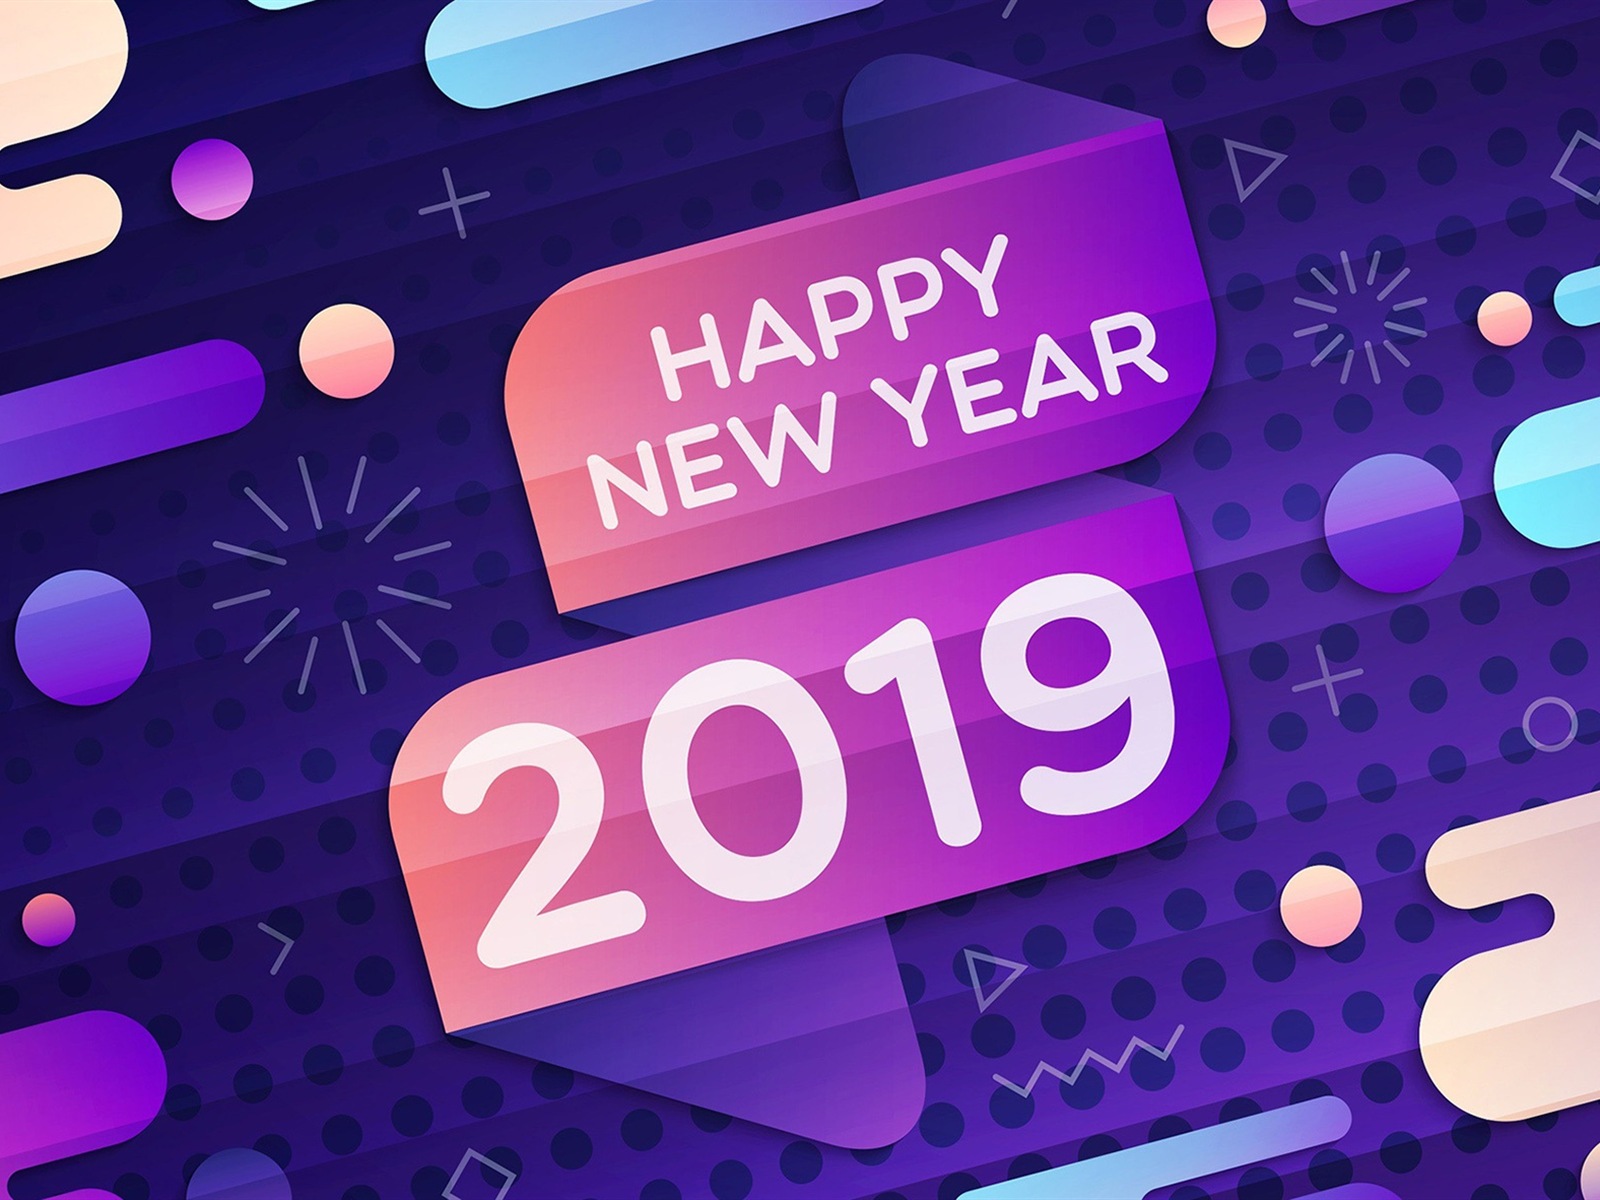 Happy New Year 2019 HD wallpapers #10 - 1600x1200